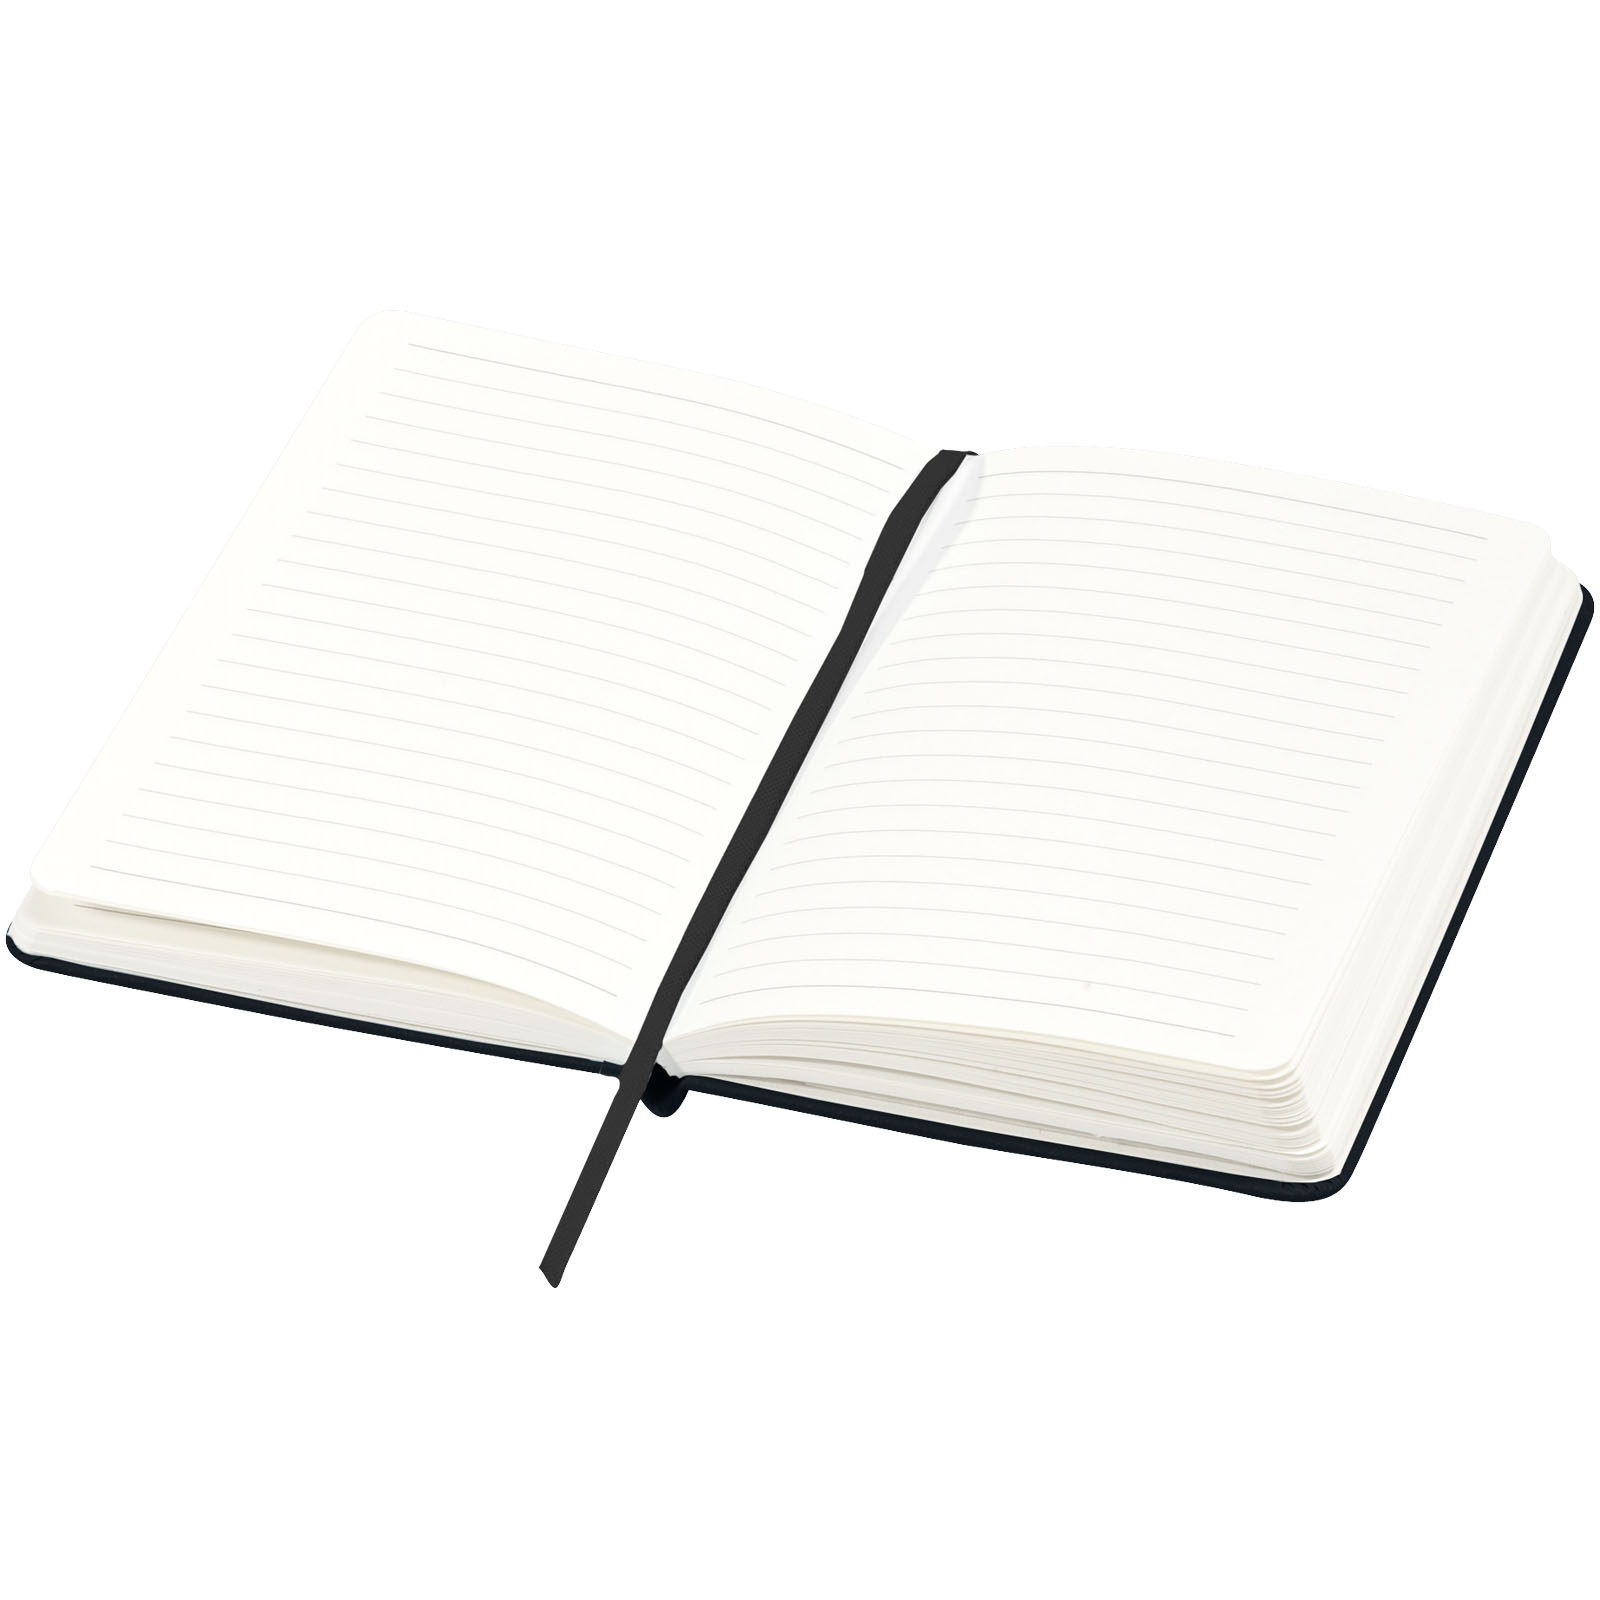 Advertising Hard cover notebooks - Classic A5 hard cover notebook - 4